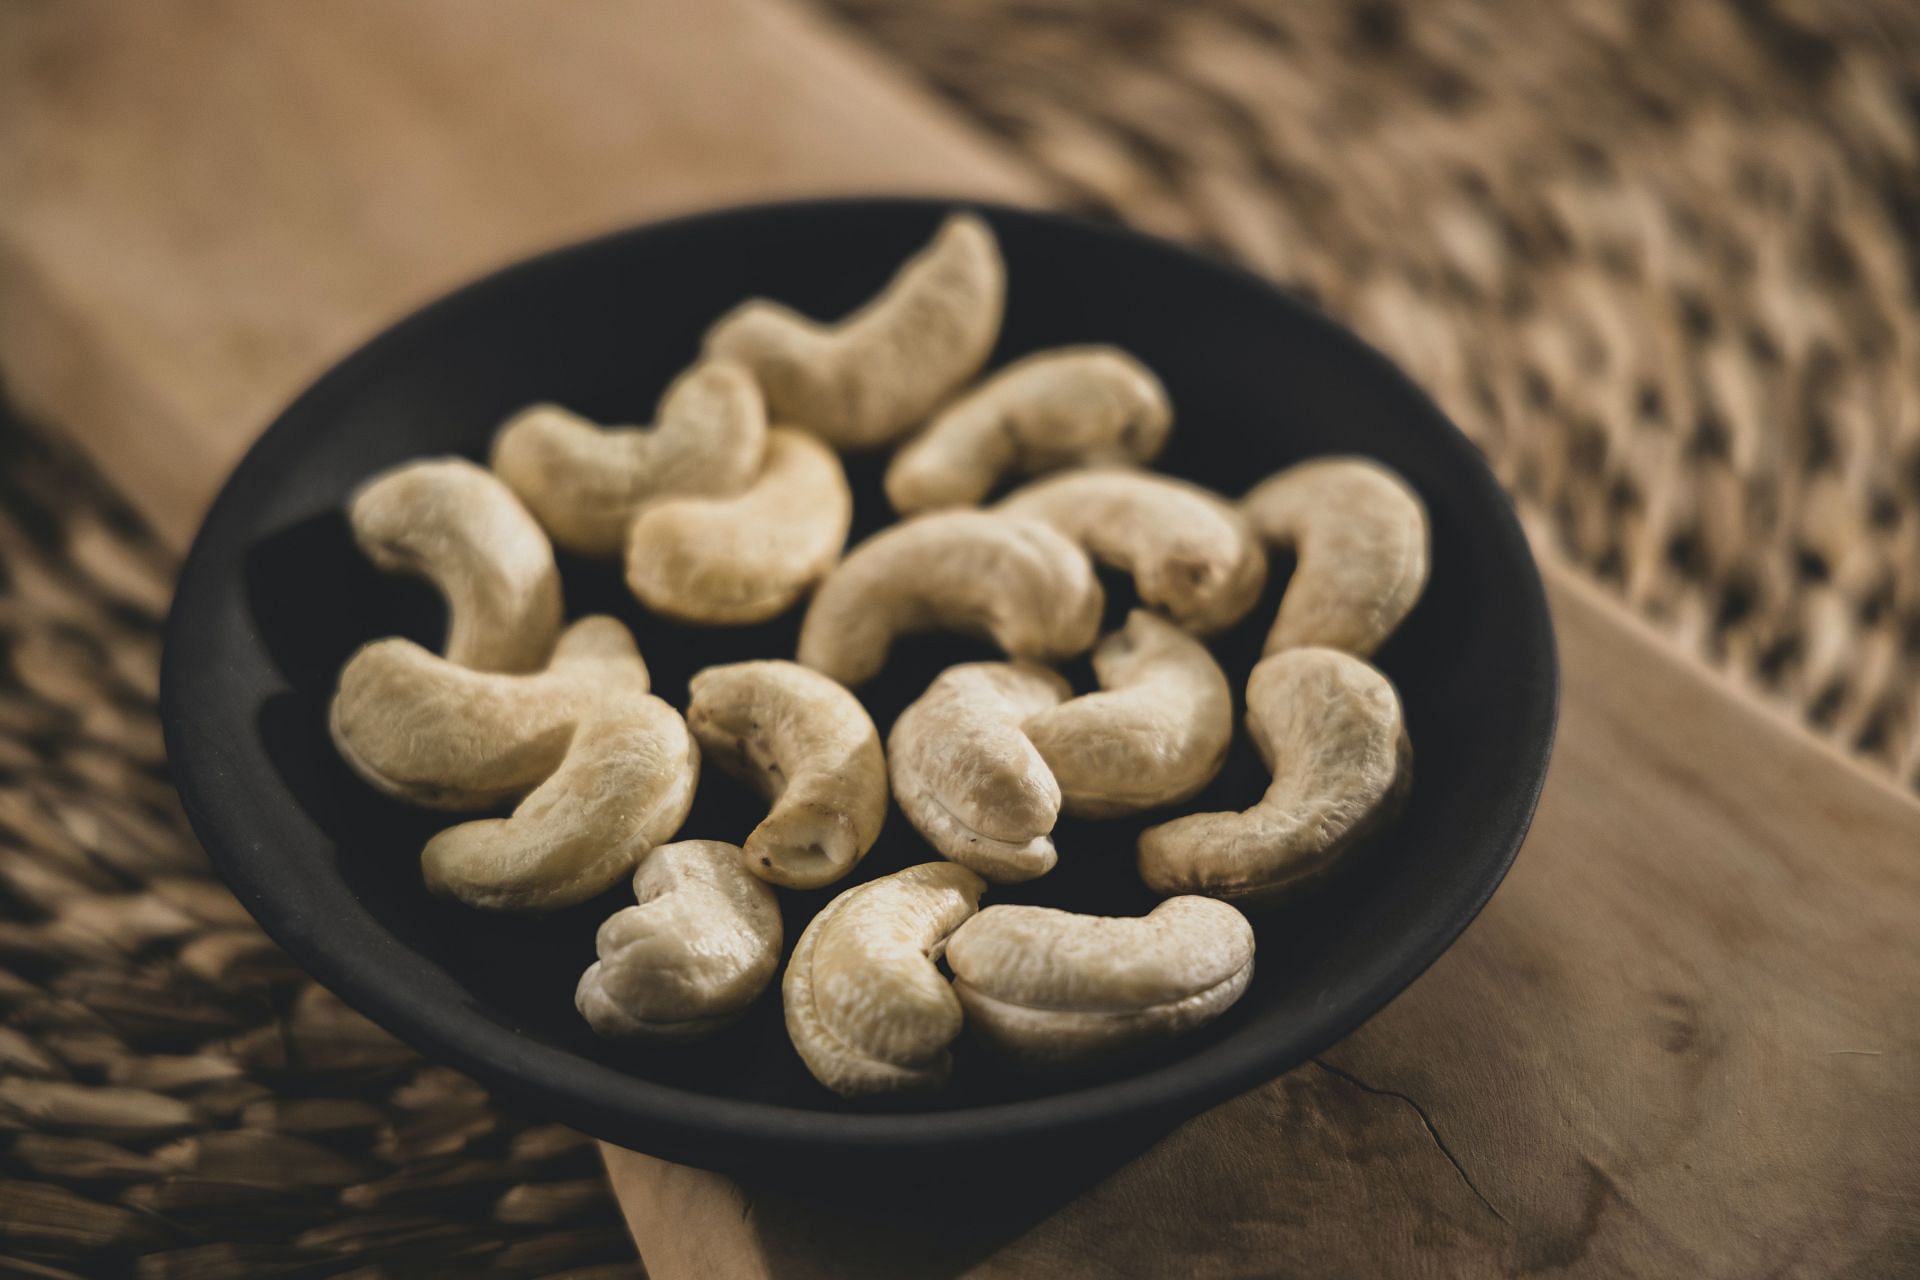 Cashews are low in fat., making then good for you. (Image via Unsplash/ Engin Akyurt)